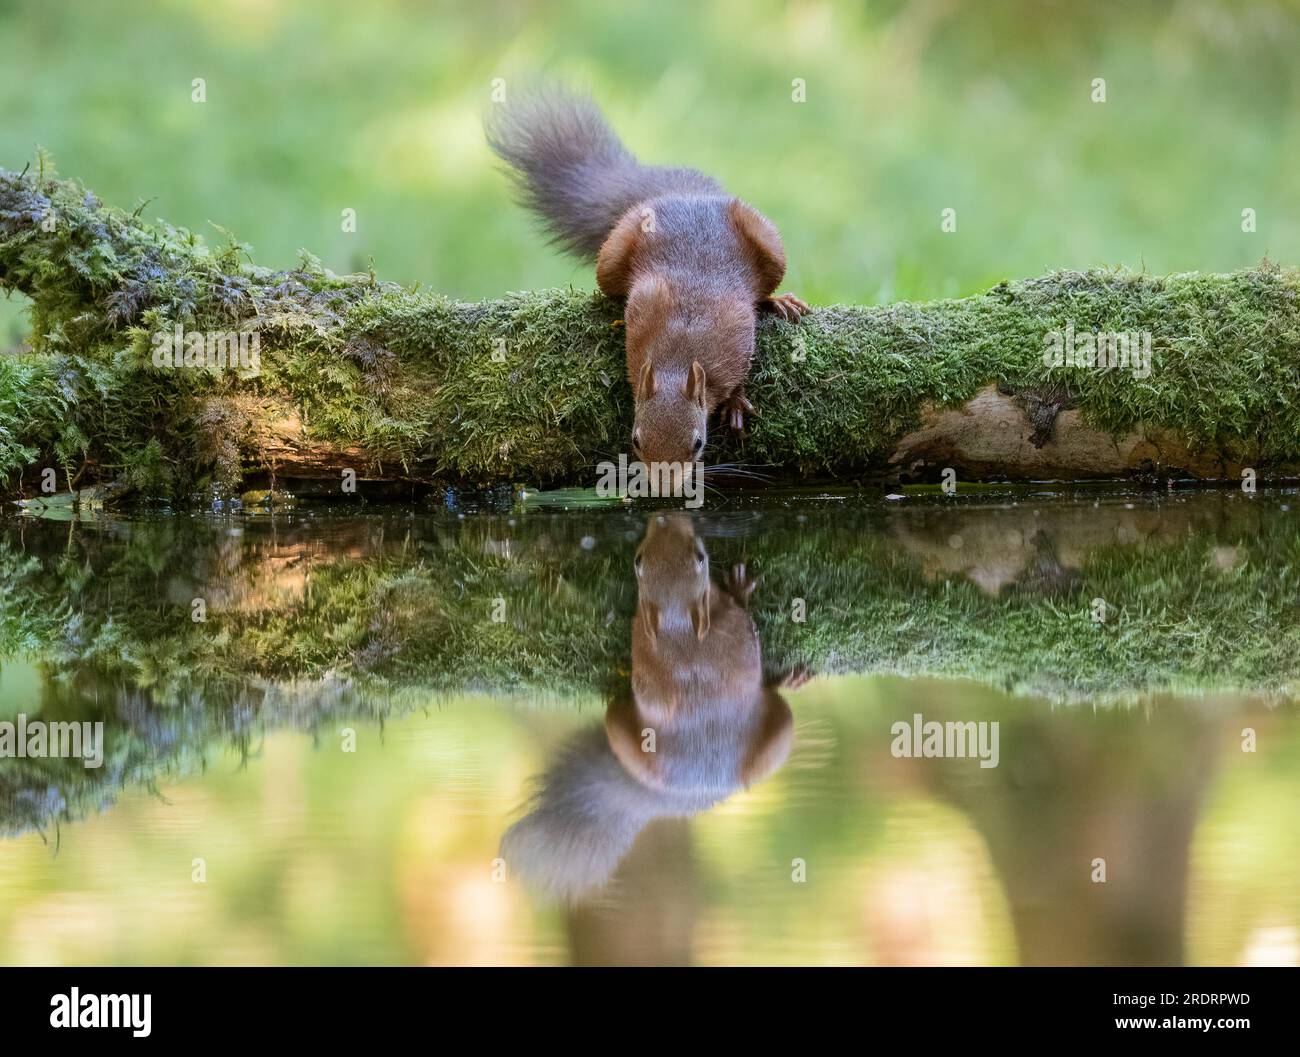 A rare Red squirrel ( Sciurus vulgaris) drinking and touching the water  . A mirror image is reflected in the water below.  Yorkshire, UK. Stock Photo